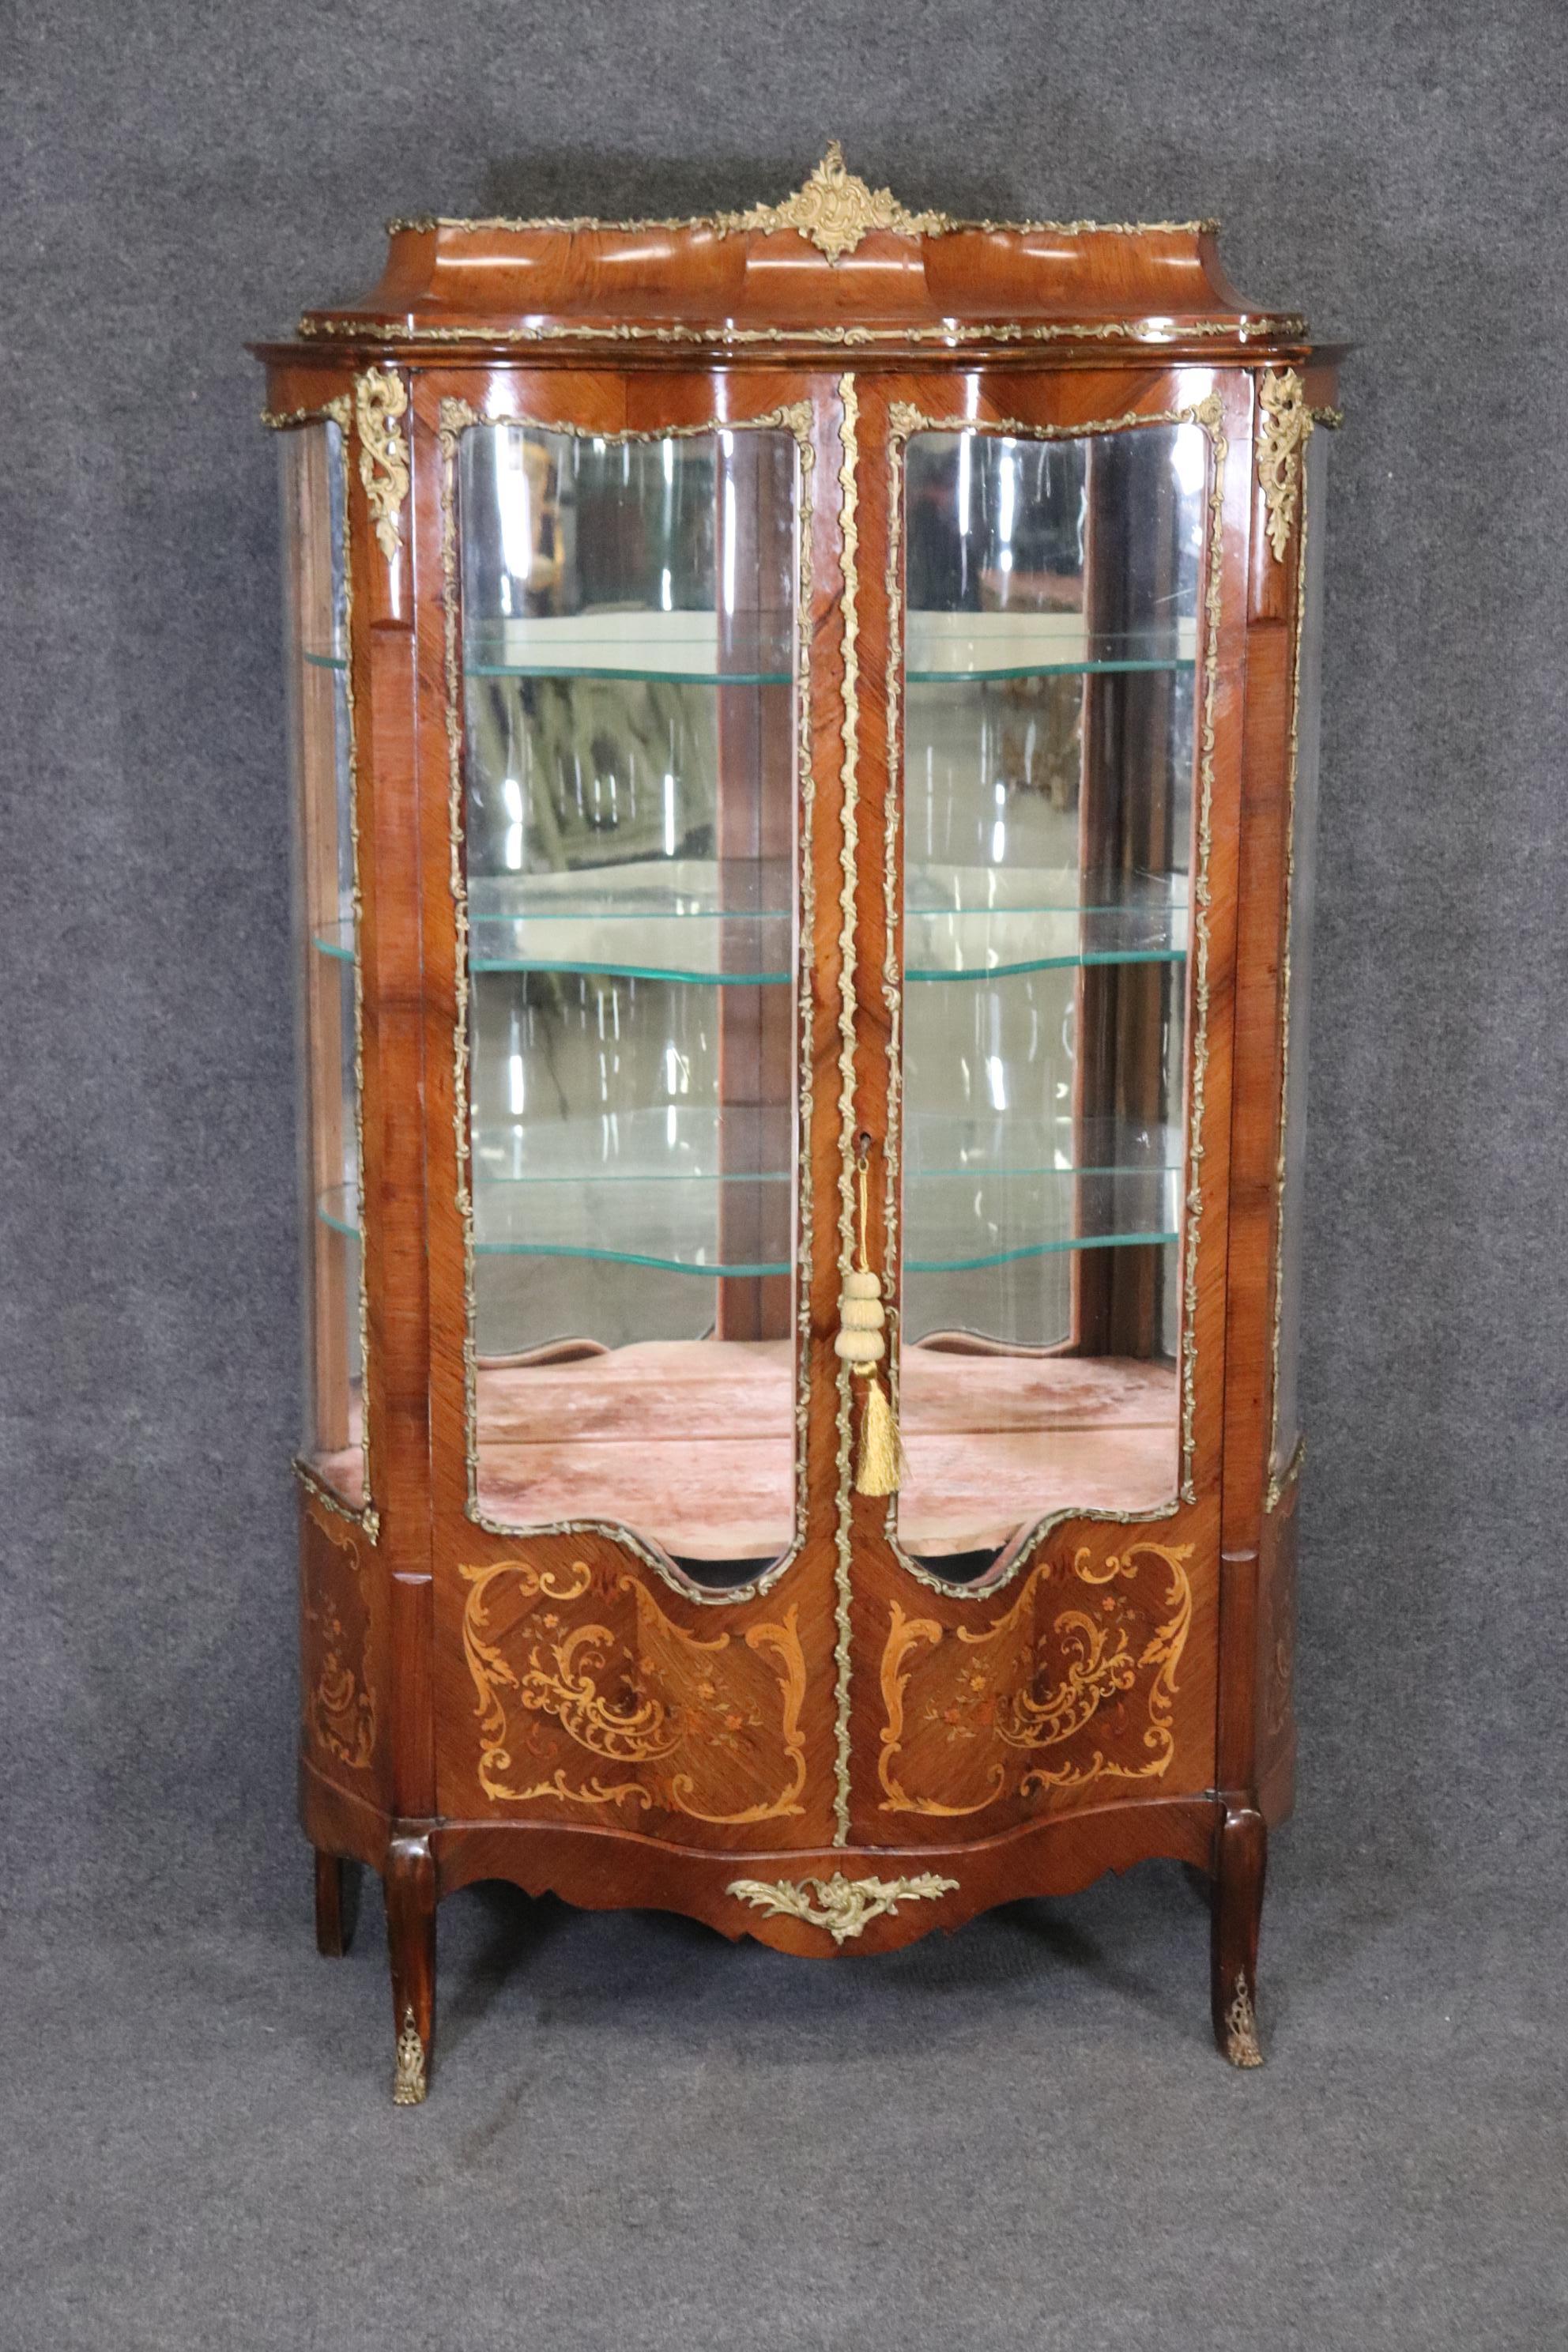 This is a beautiful example of Louis XV style furniture. This curio cabinet is made exceptionally well! From the rich mahogany and brass accents/hardware and then accompanied by the inlaid marquetry work at the bottom front of the piece makes this